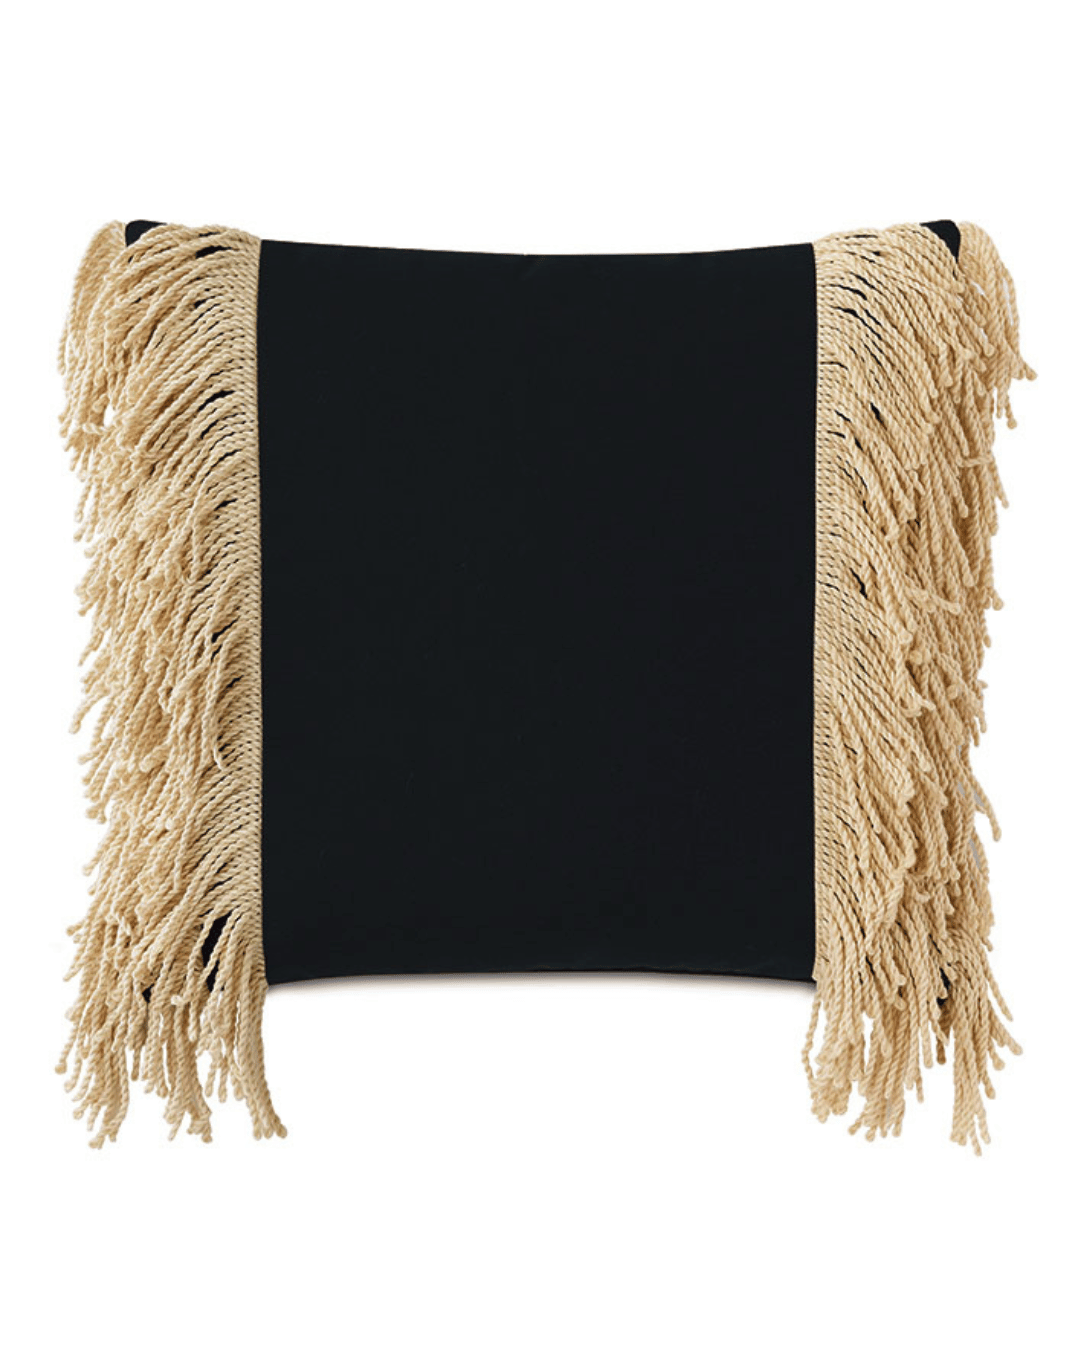 A square Paler Fringe Black Pillow with a thick fringe of tan tassels in Arizona style along the top and bottom edges, isolated on a white background by Eastern Accents.